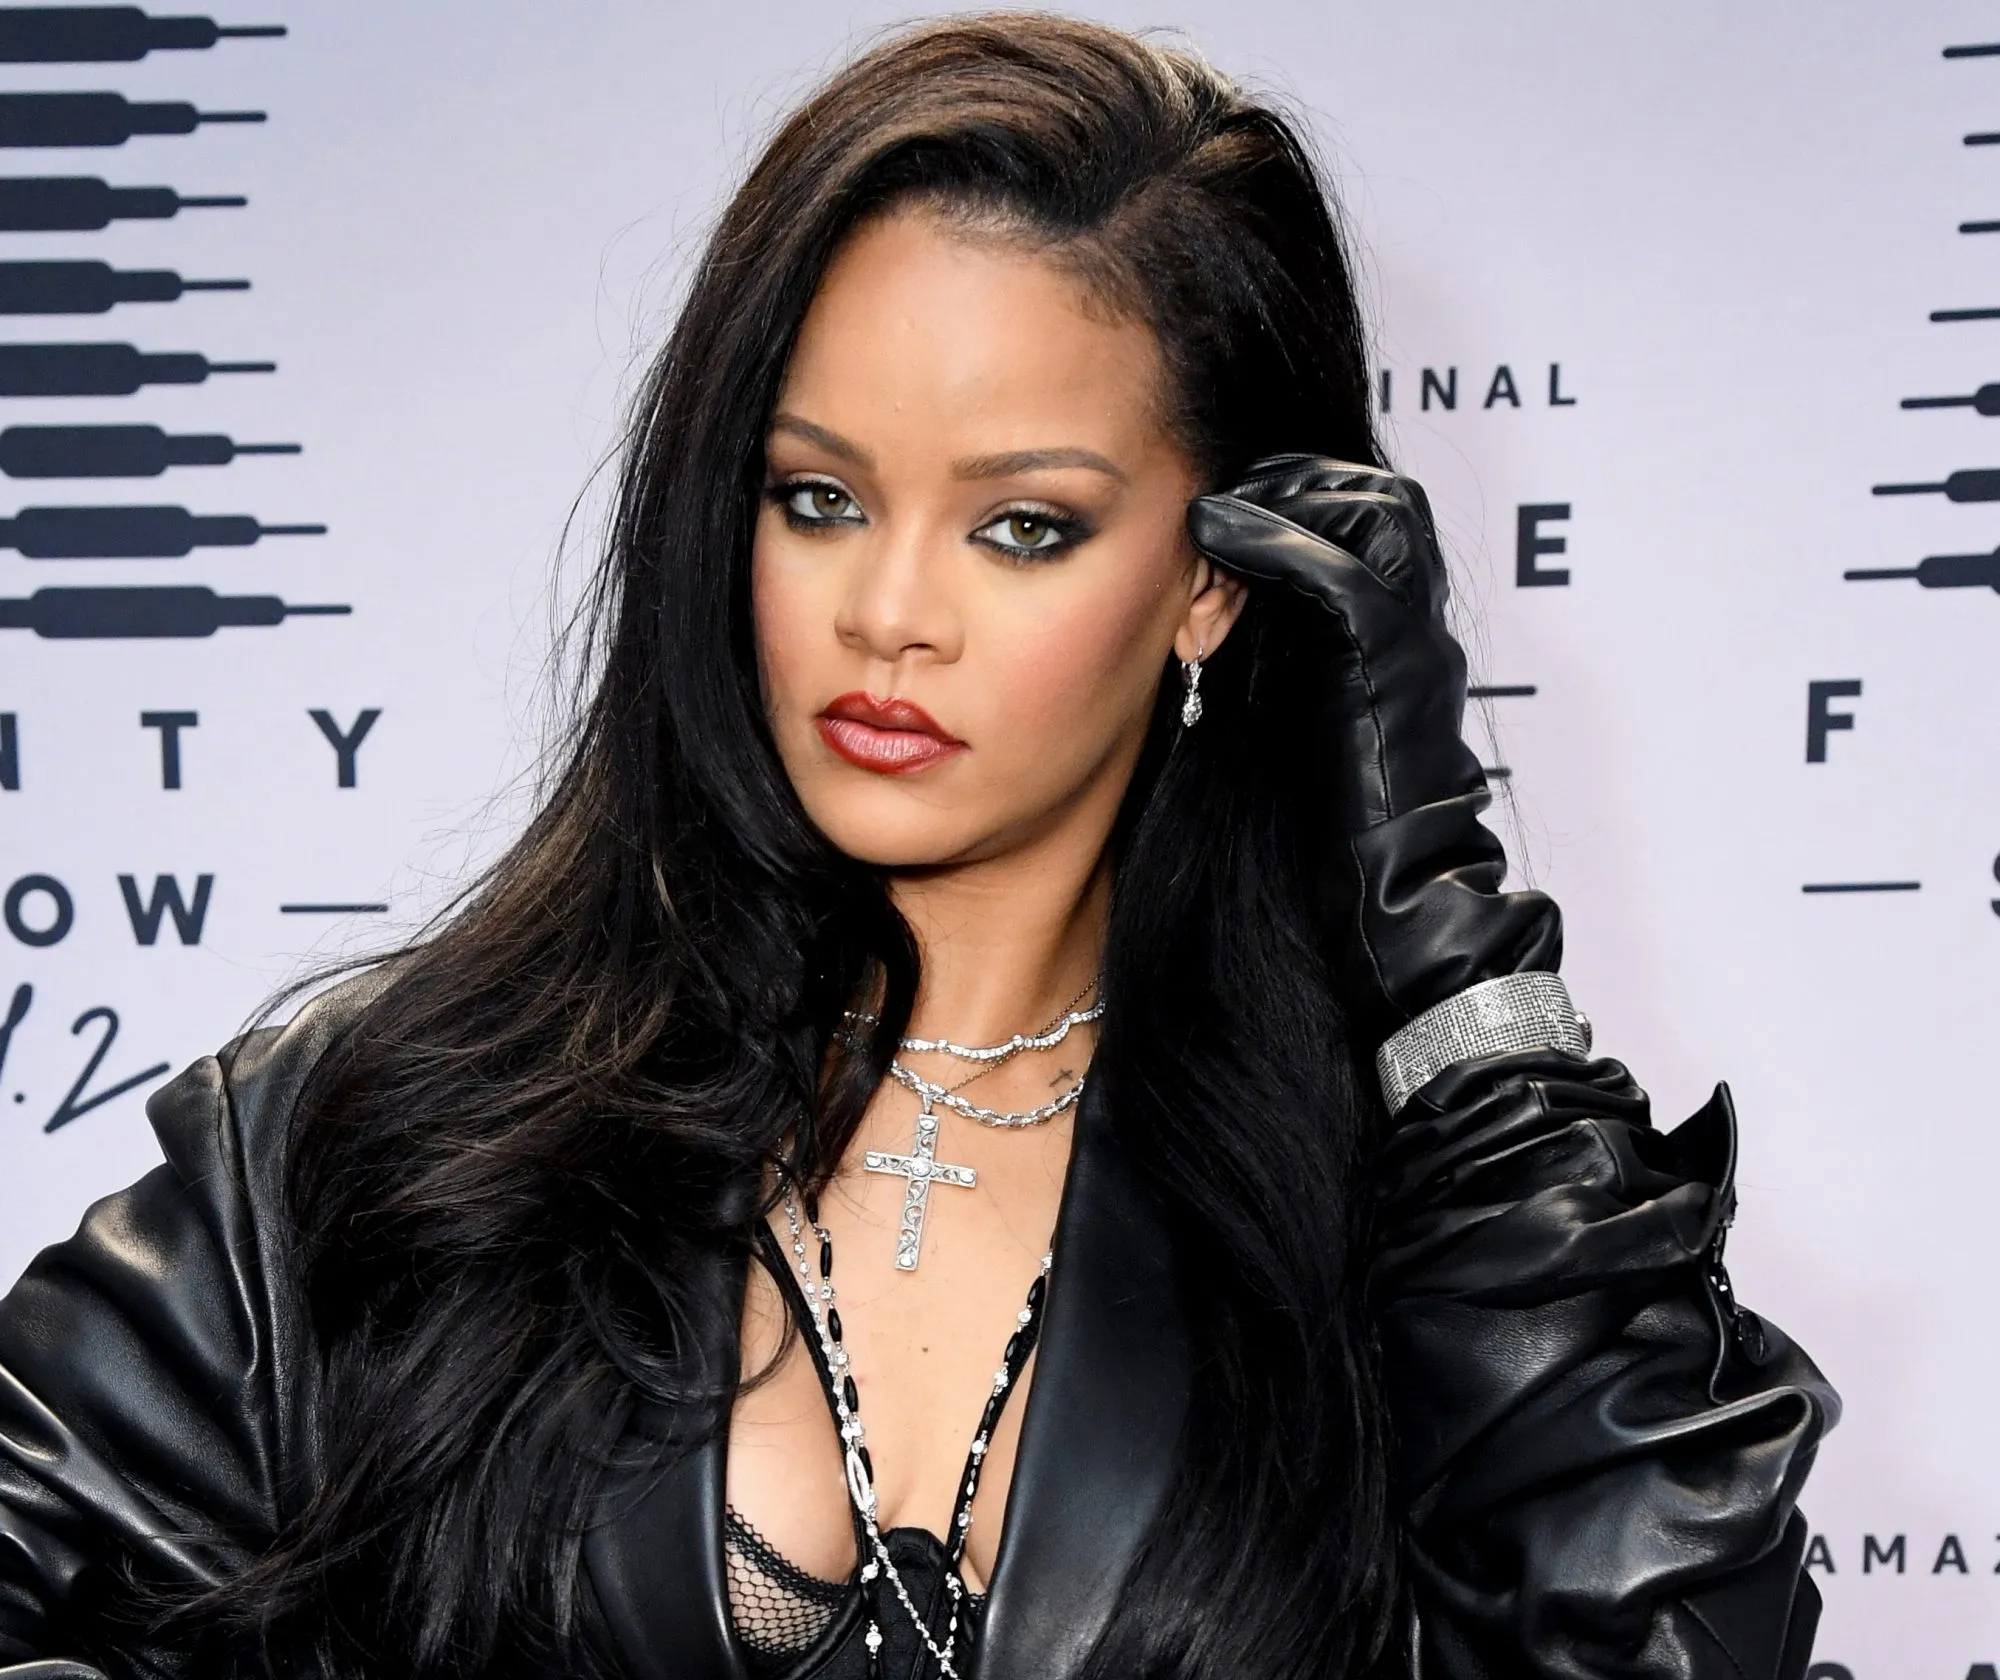 Rihanna's new collection for Savage x Fenty benefits her charity